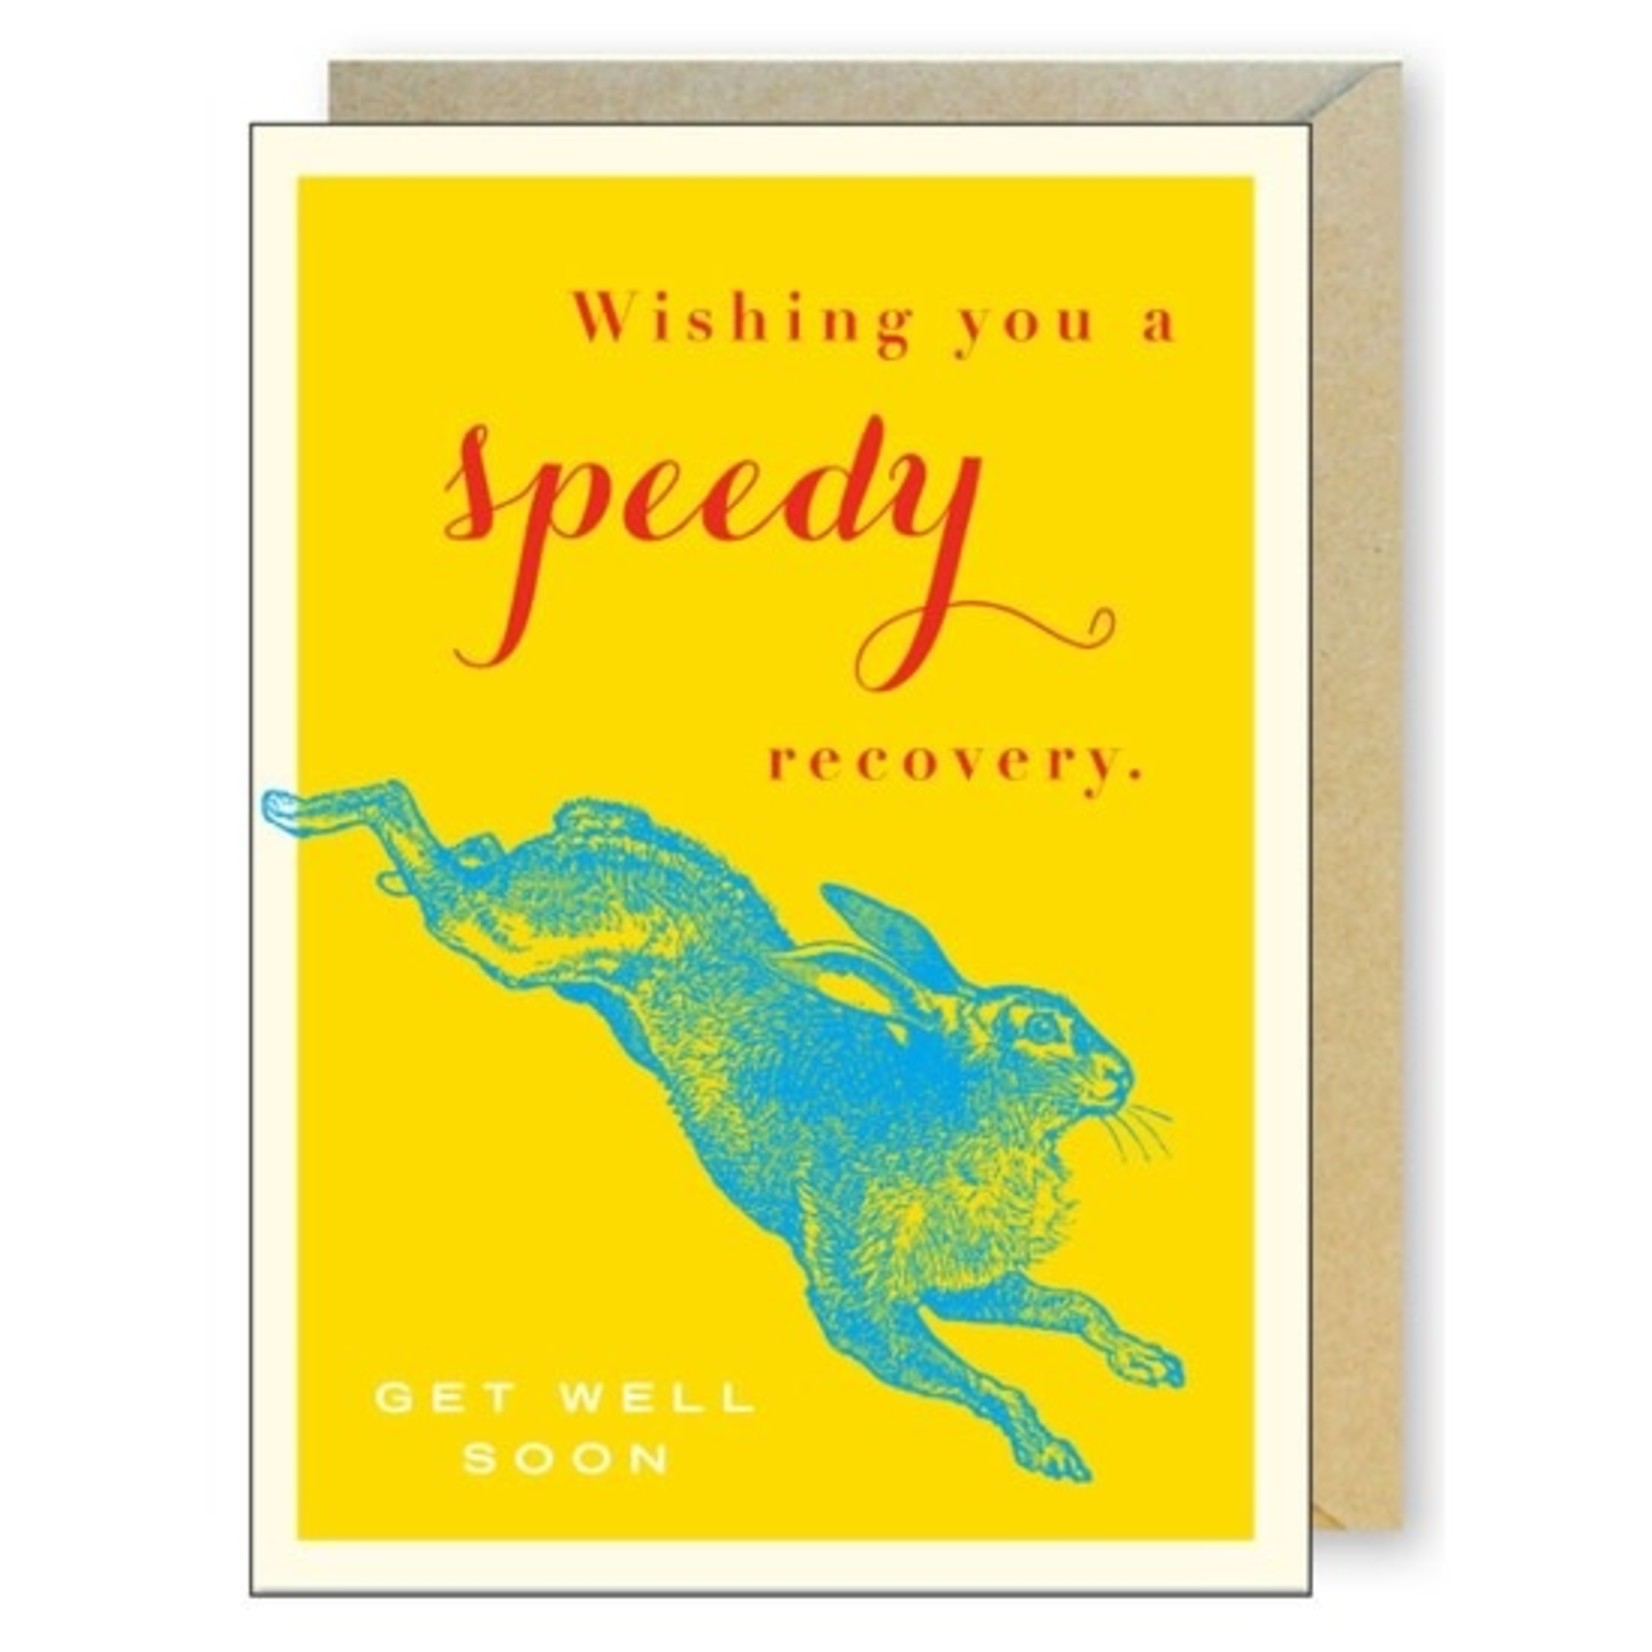 Greeting Cards - Feel Better Speedy Recovery Rabbit